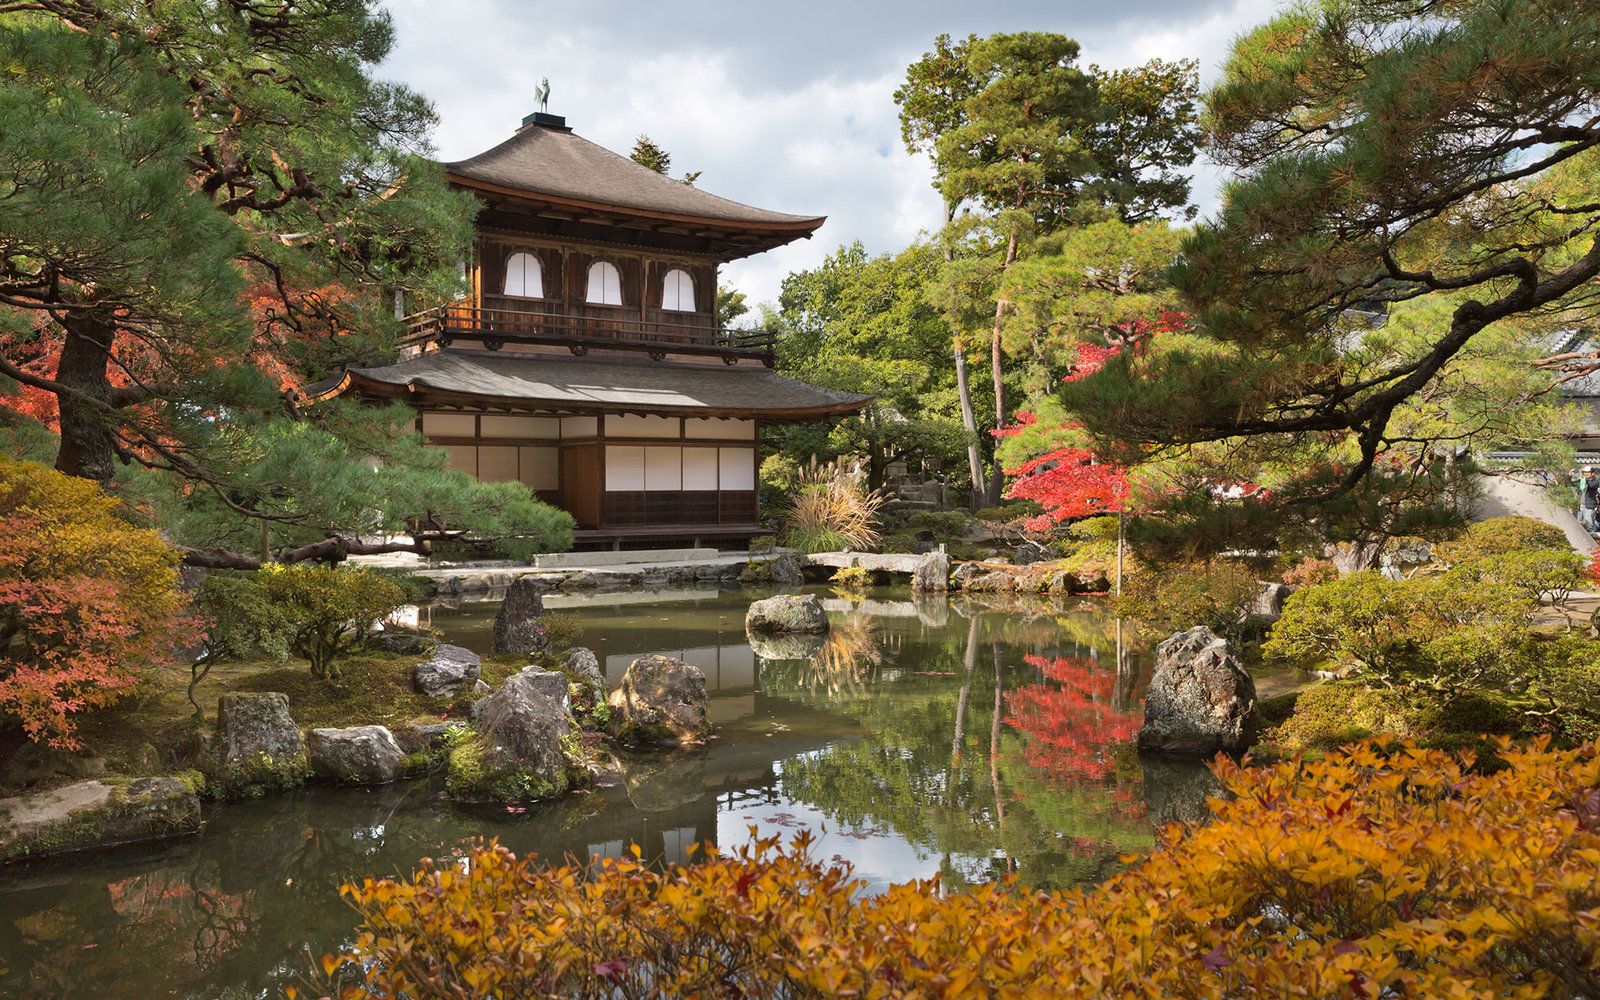 ancient japanese temples